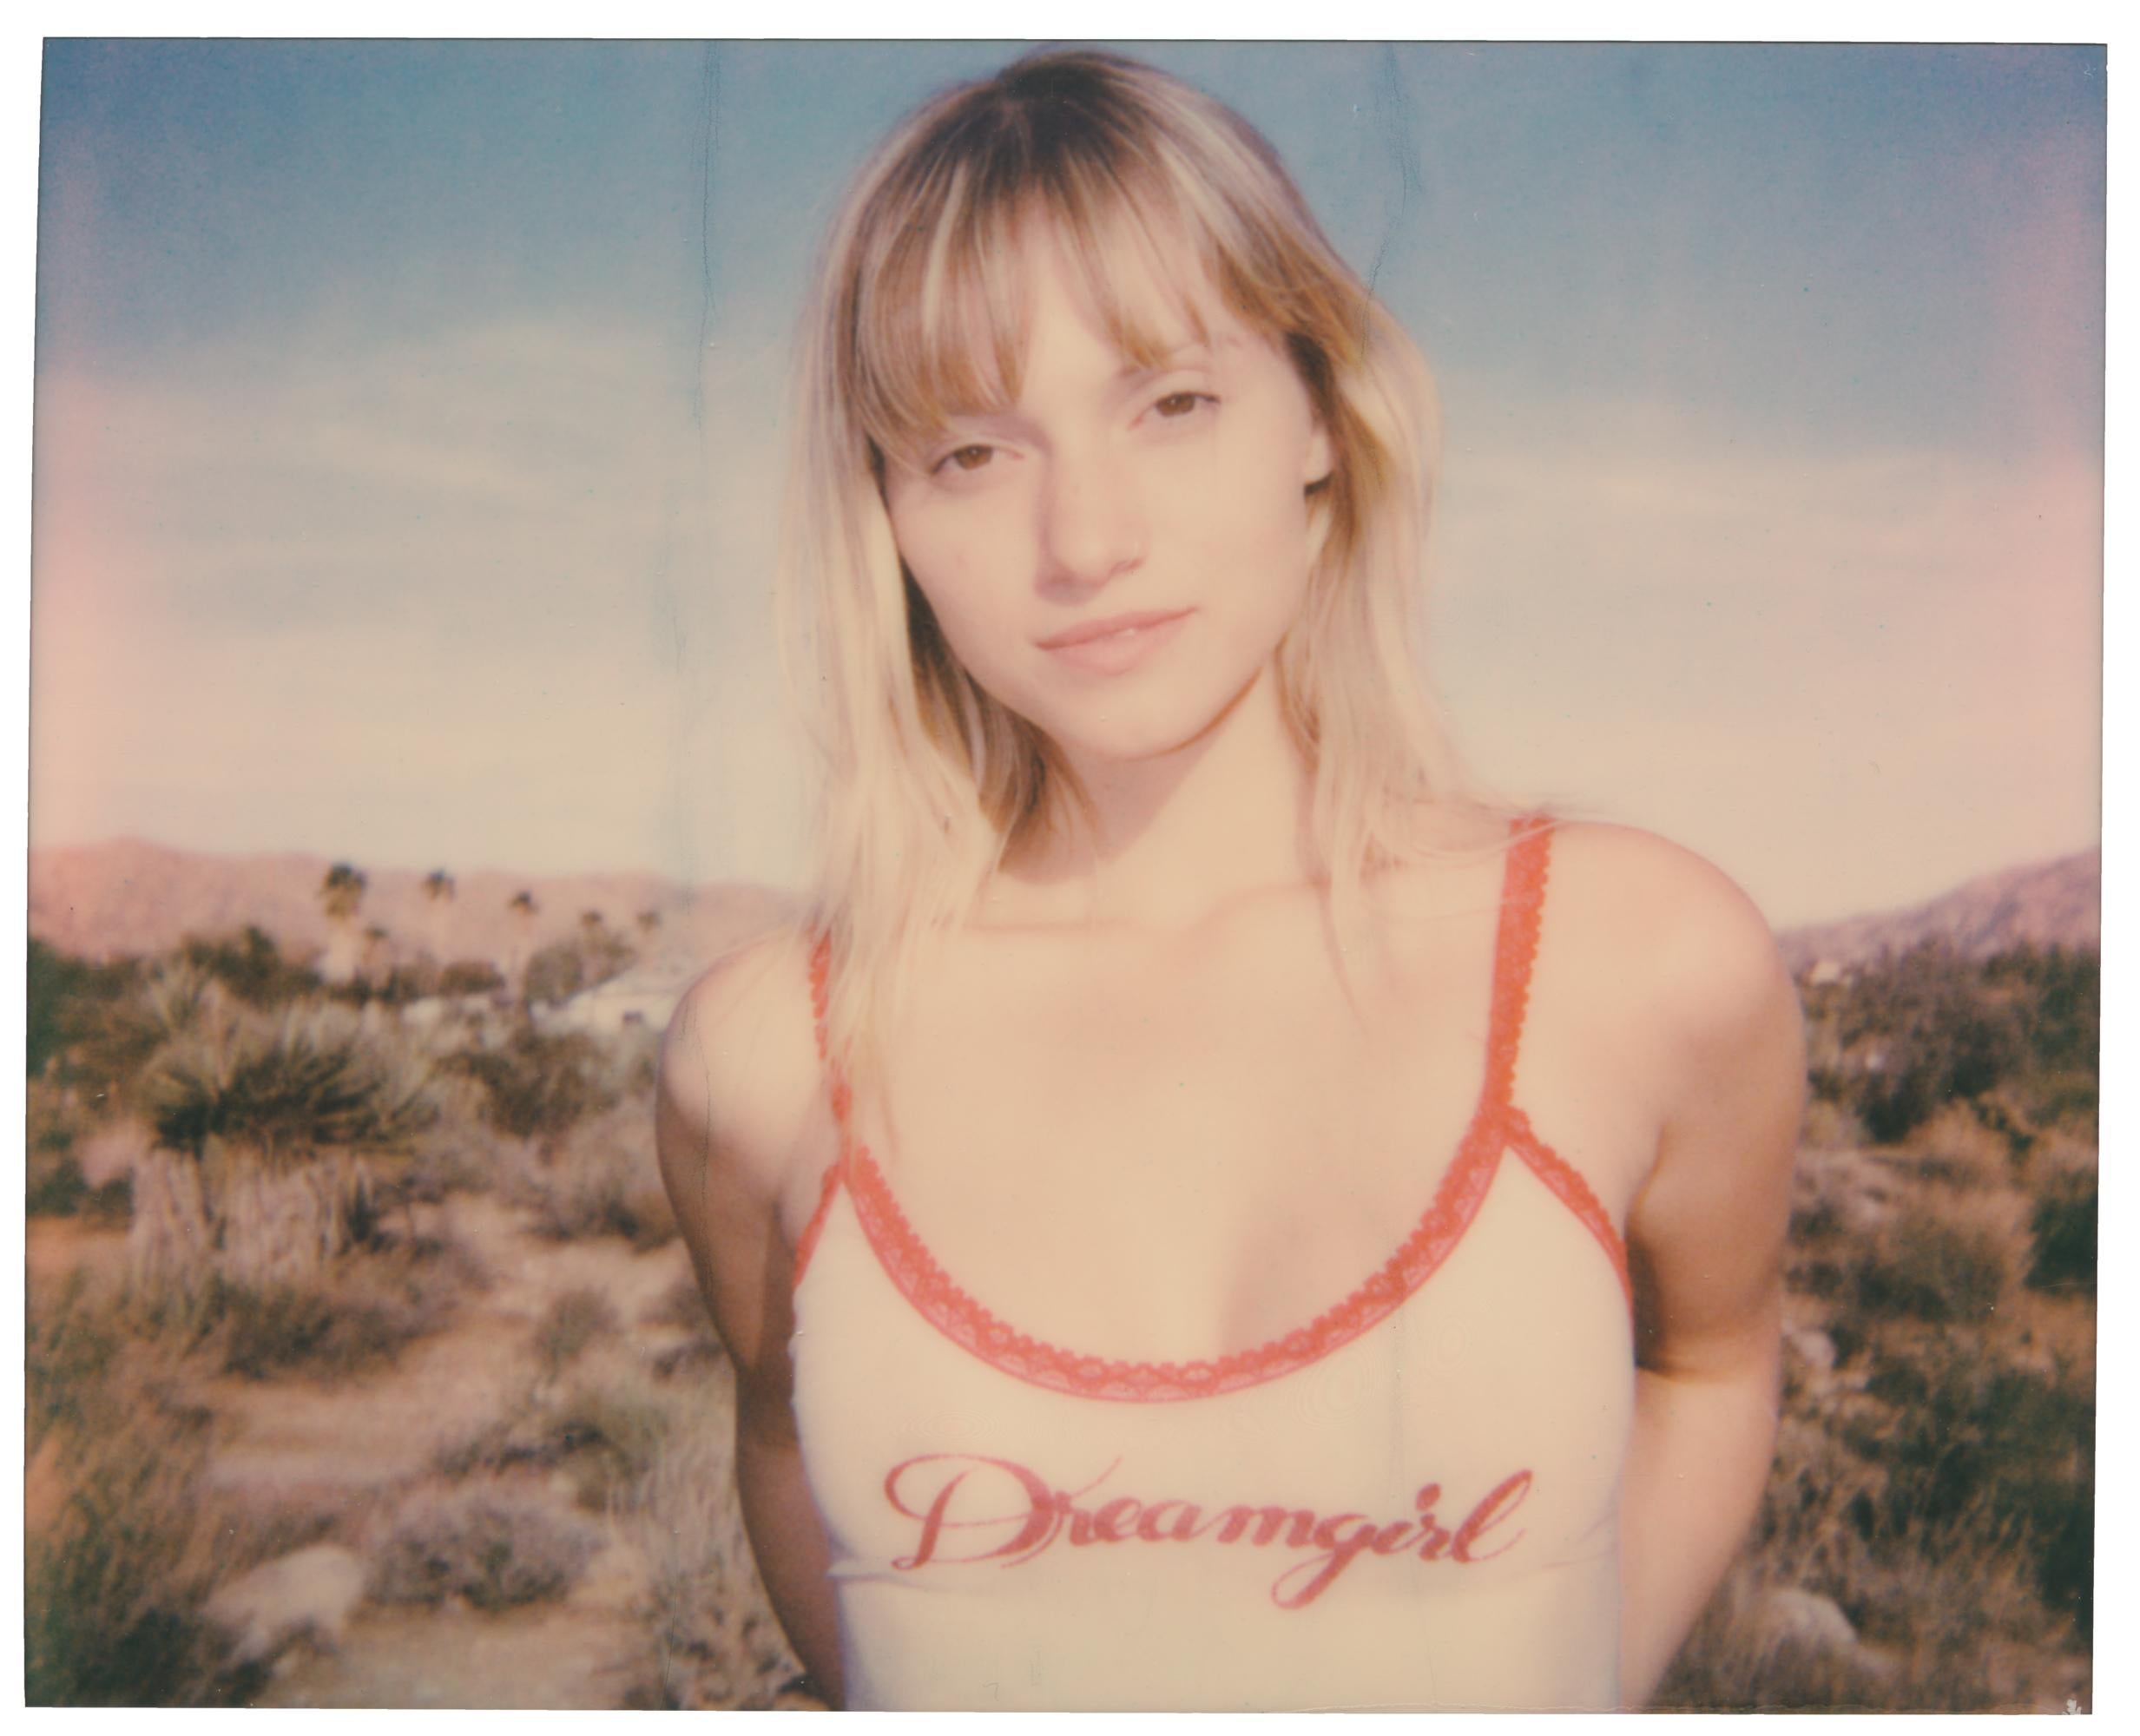 Stefanie Schneider Color Photograph - Dreamgirl (Chicks and Chicks and Sometimes Cocks)